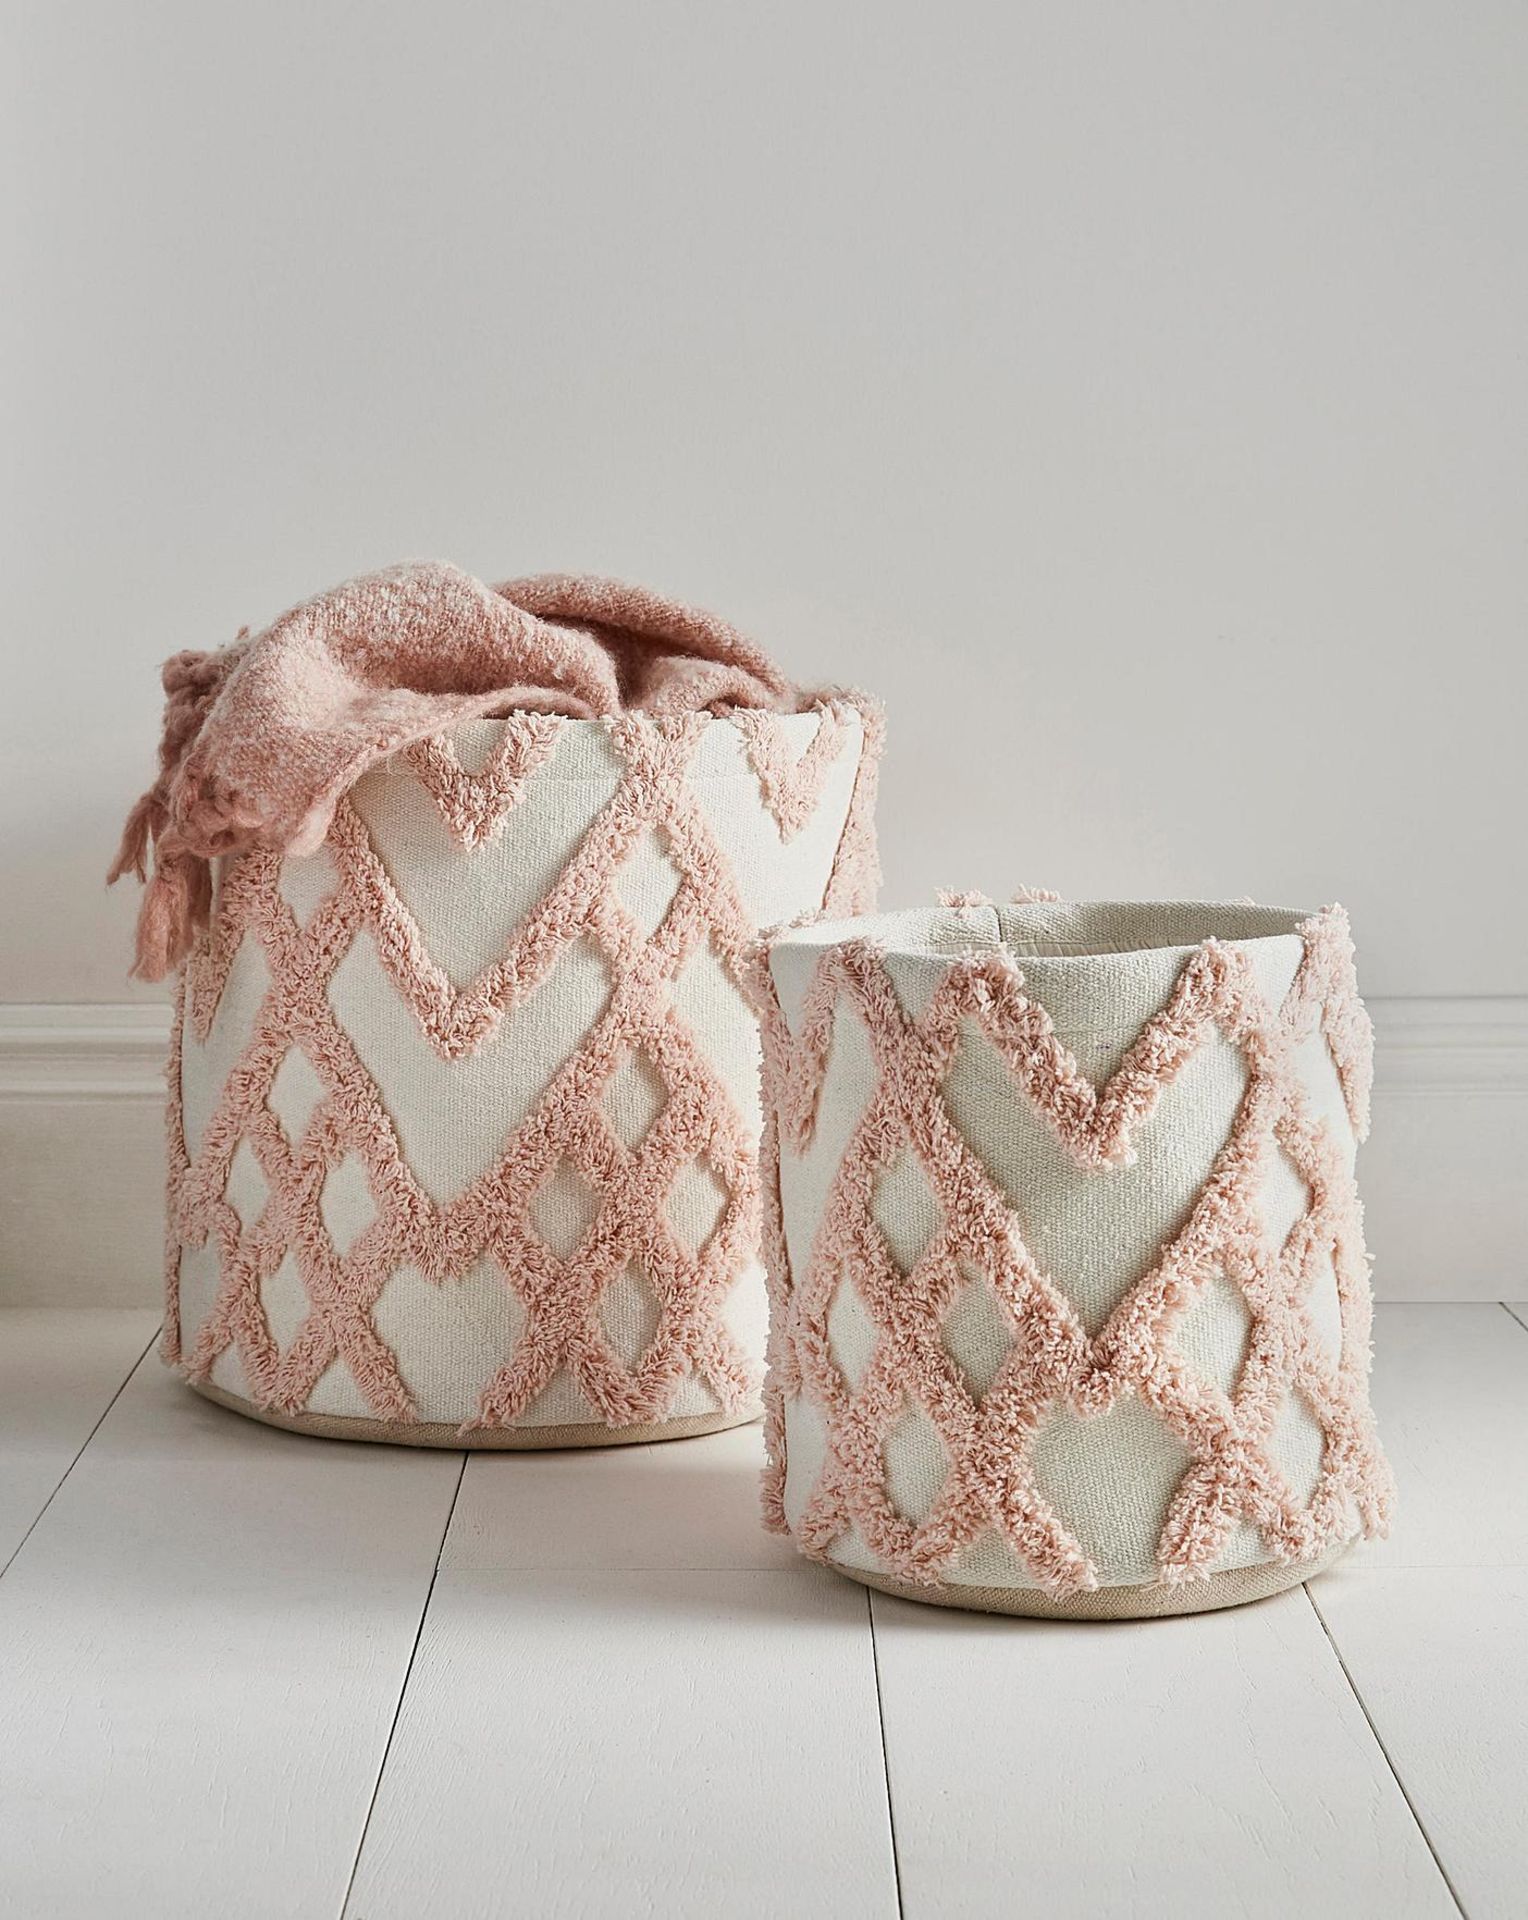 3x BRAND NEW Set of 2 Pink Ruffled Woven Baskets. RRP £39 EACH. These lovely monochrome woven